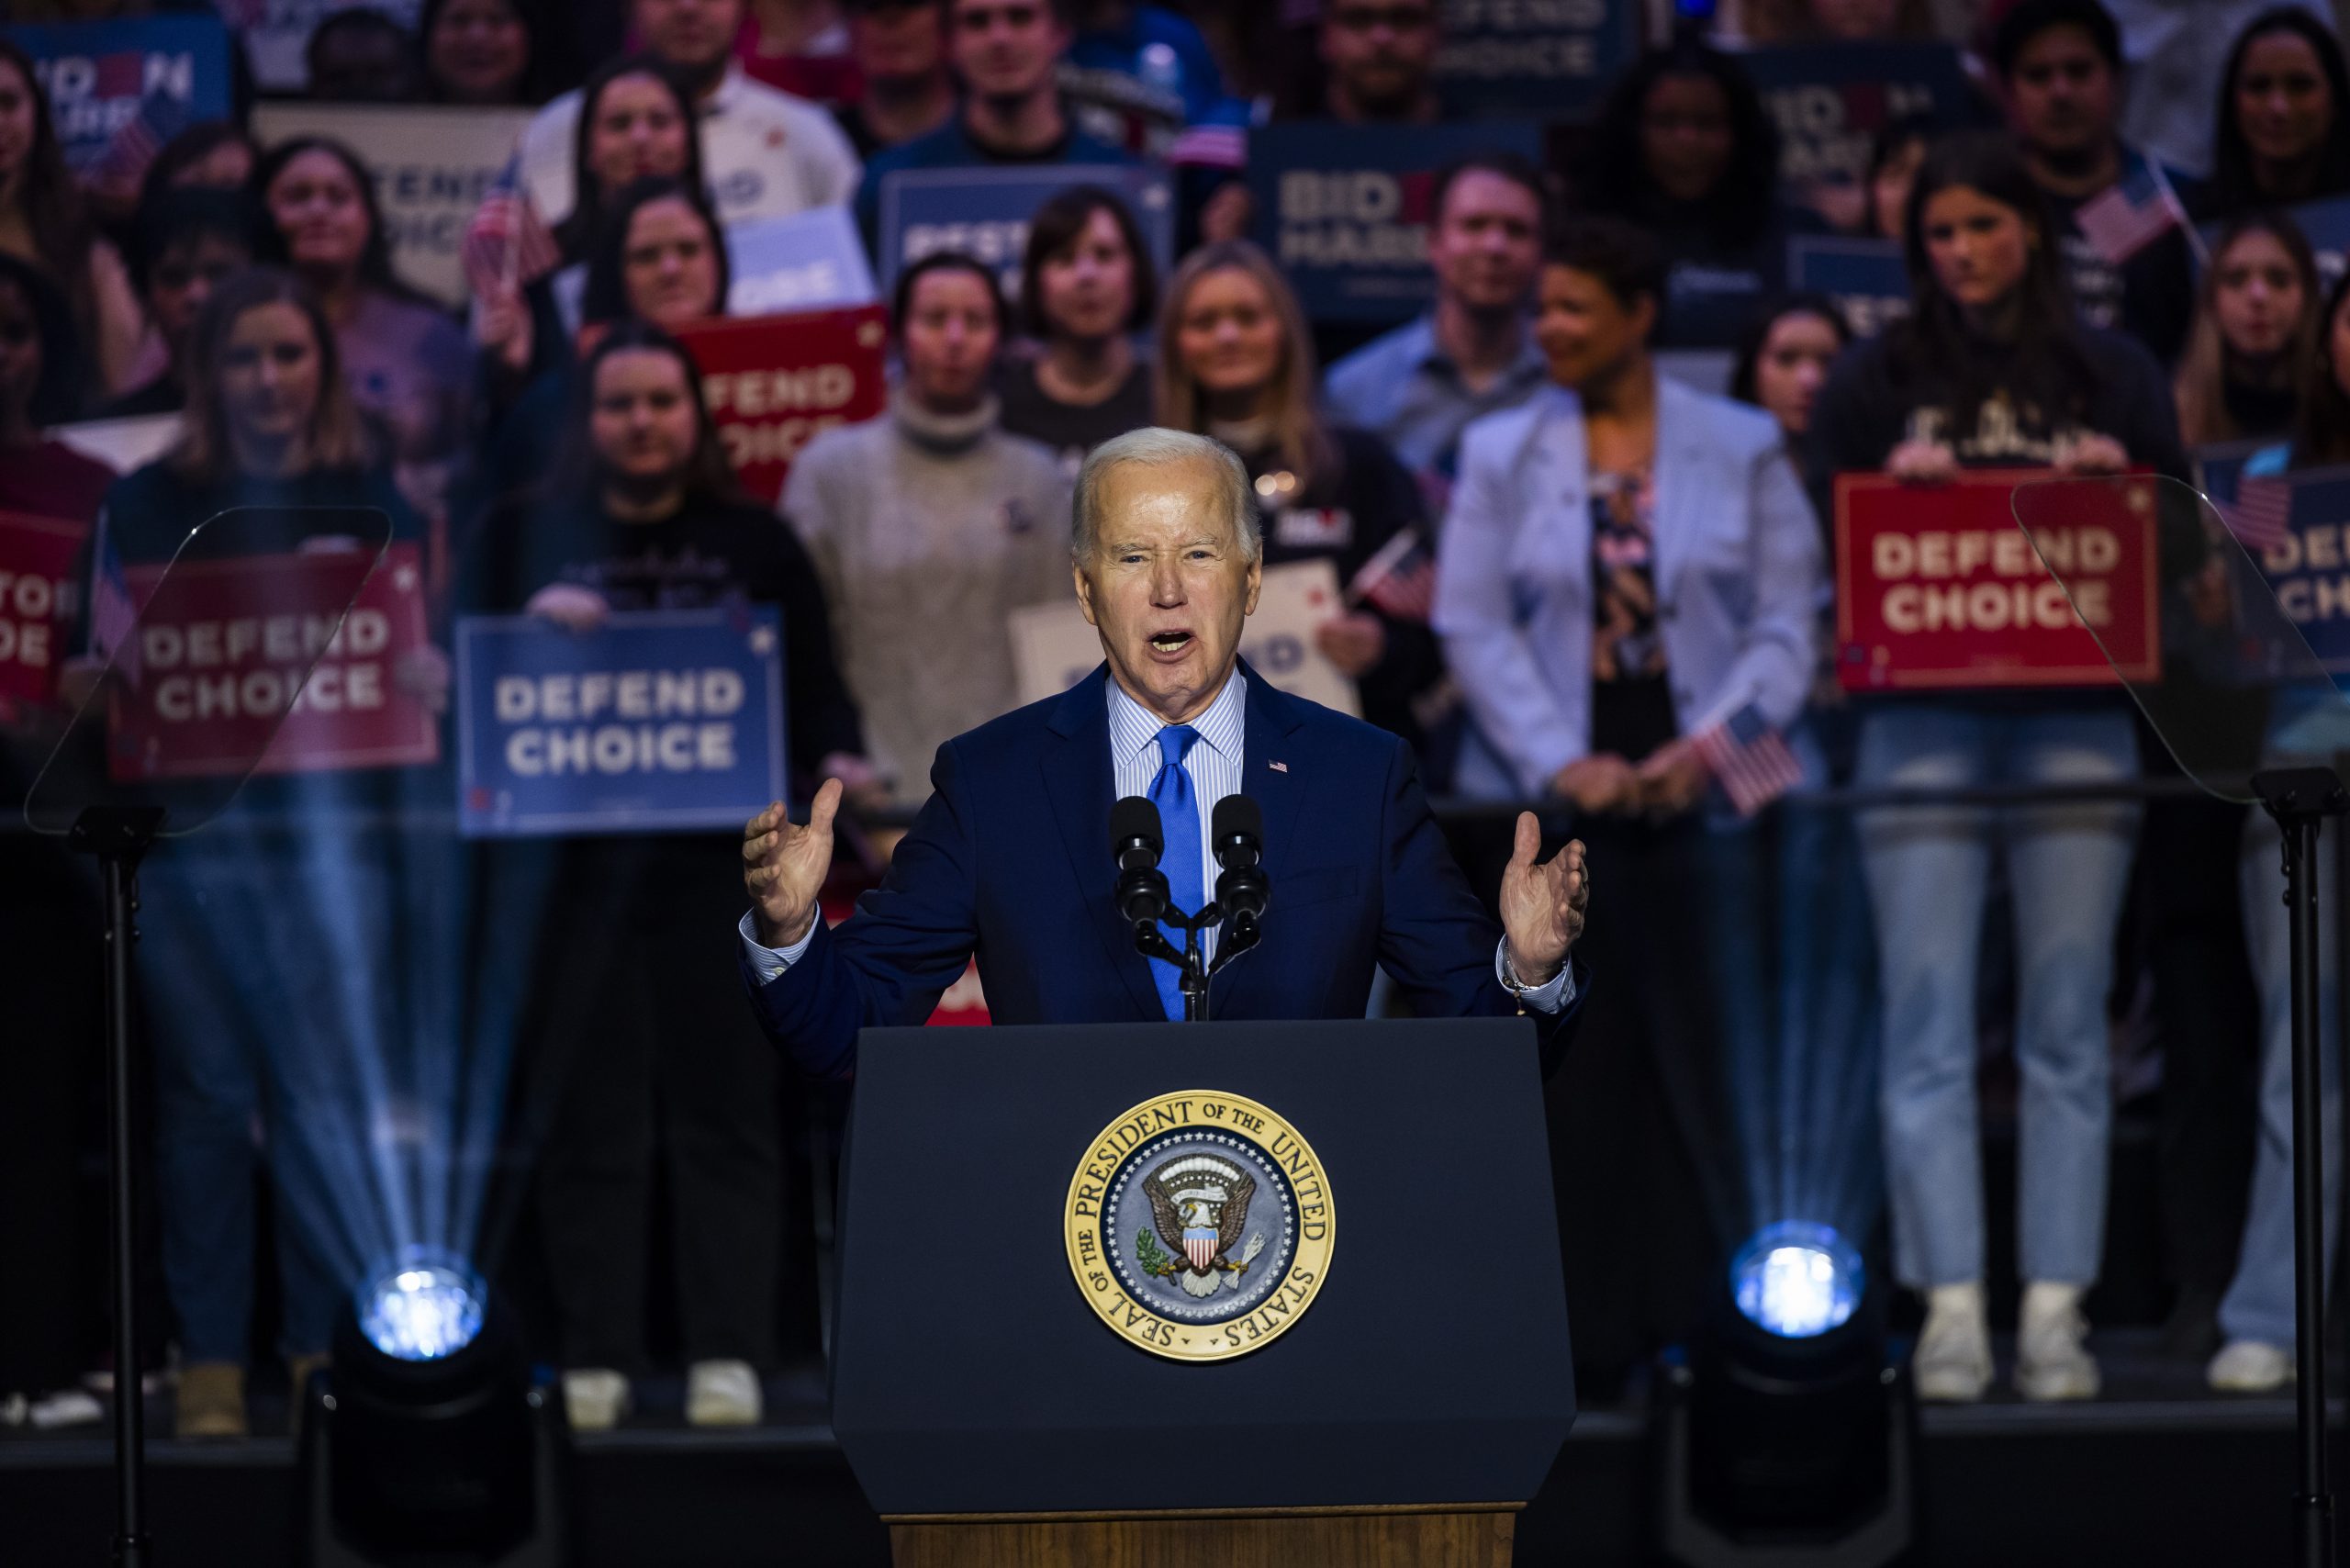 Joe Biden blasts ‘MAGA takeover’ & issues stern warning to Trump after winning New Hampshire primary with write-in votes